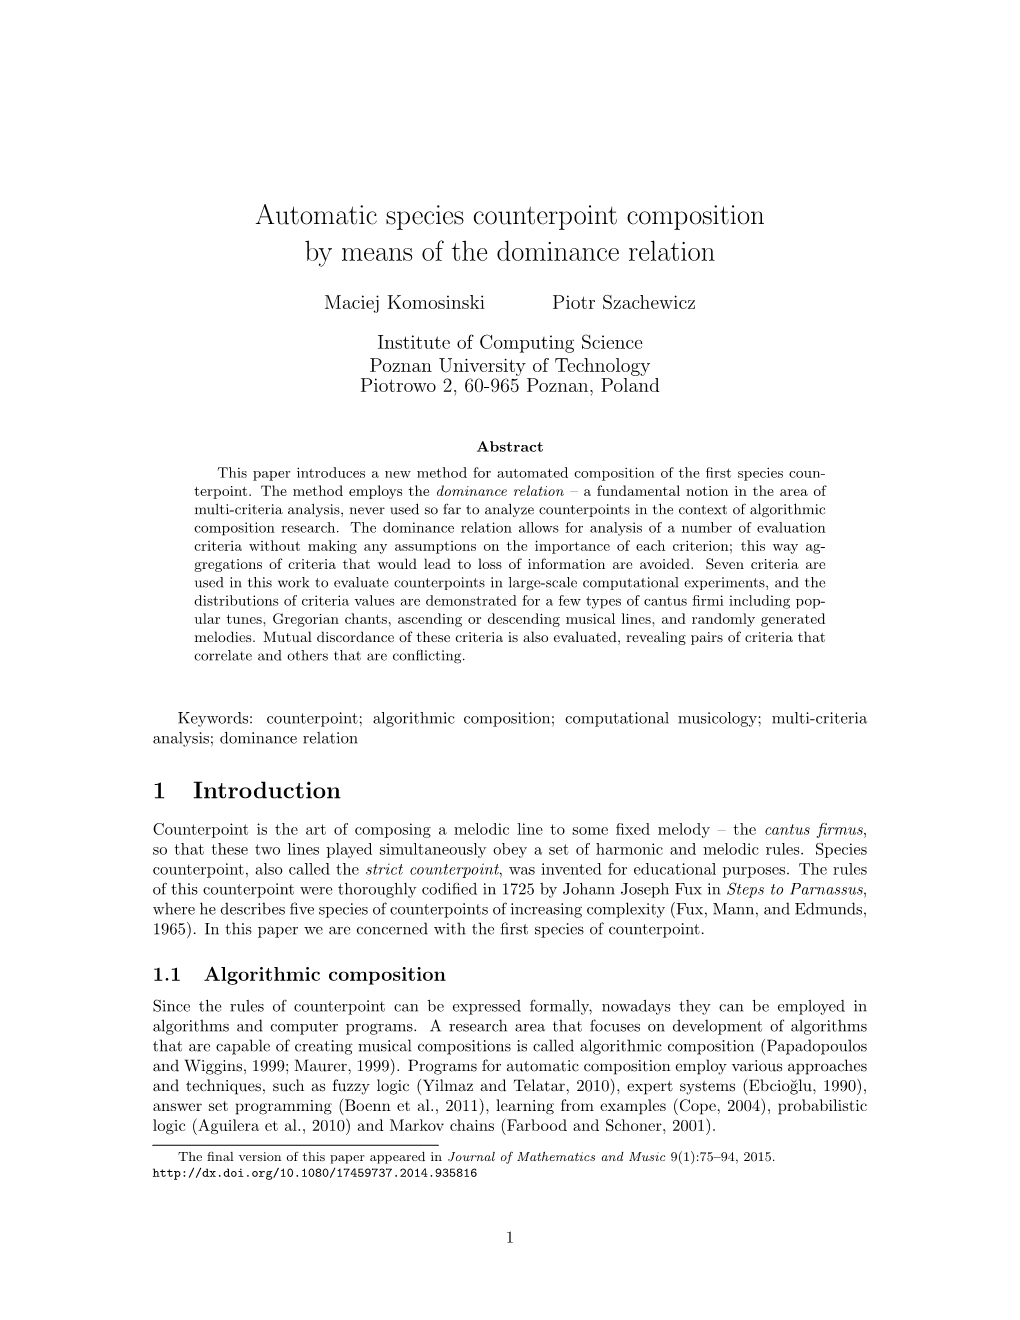 Automatic Species Counterpoint Composition by Means of the Dominance Relation